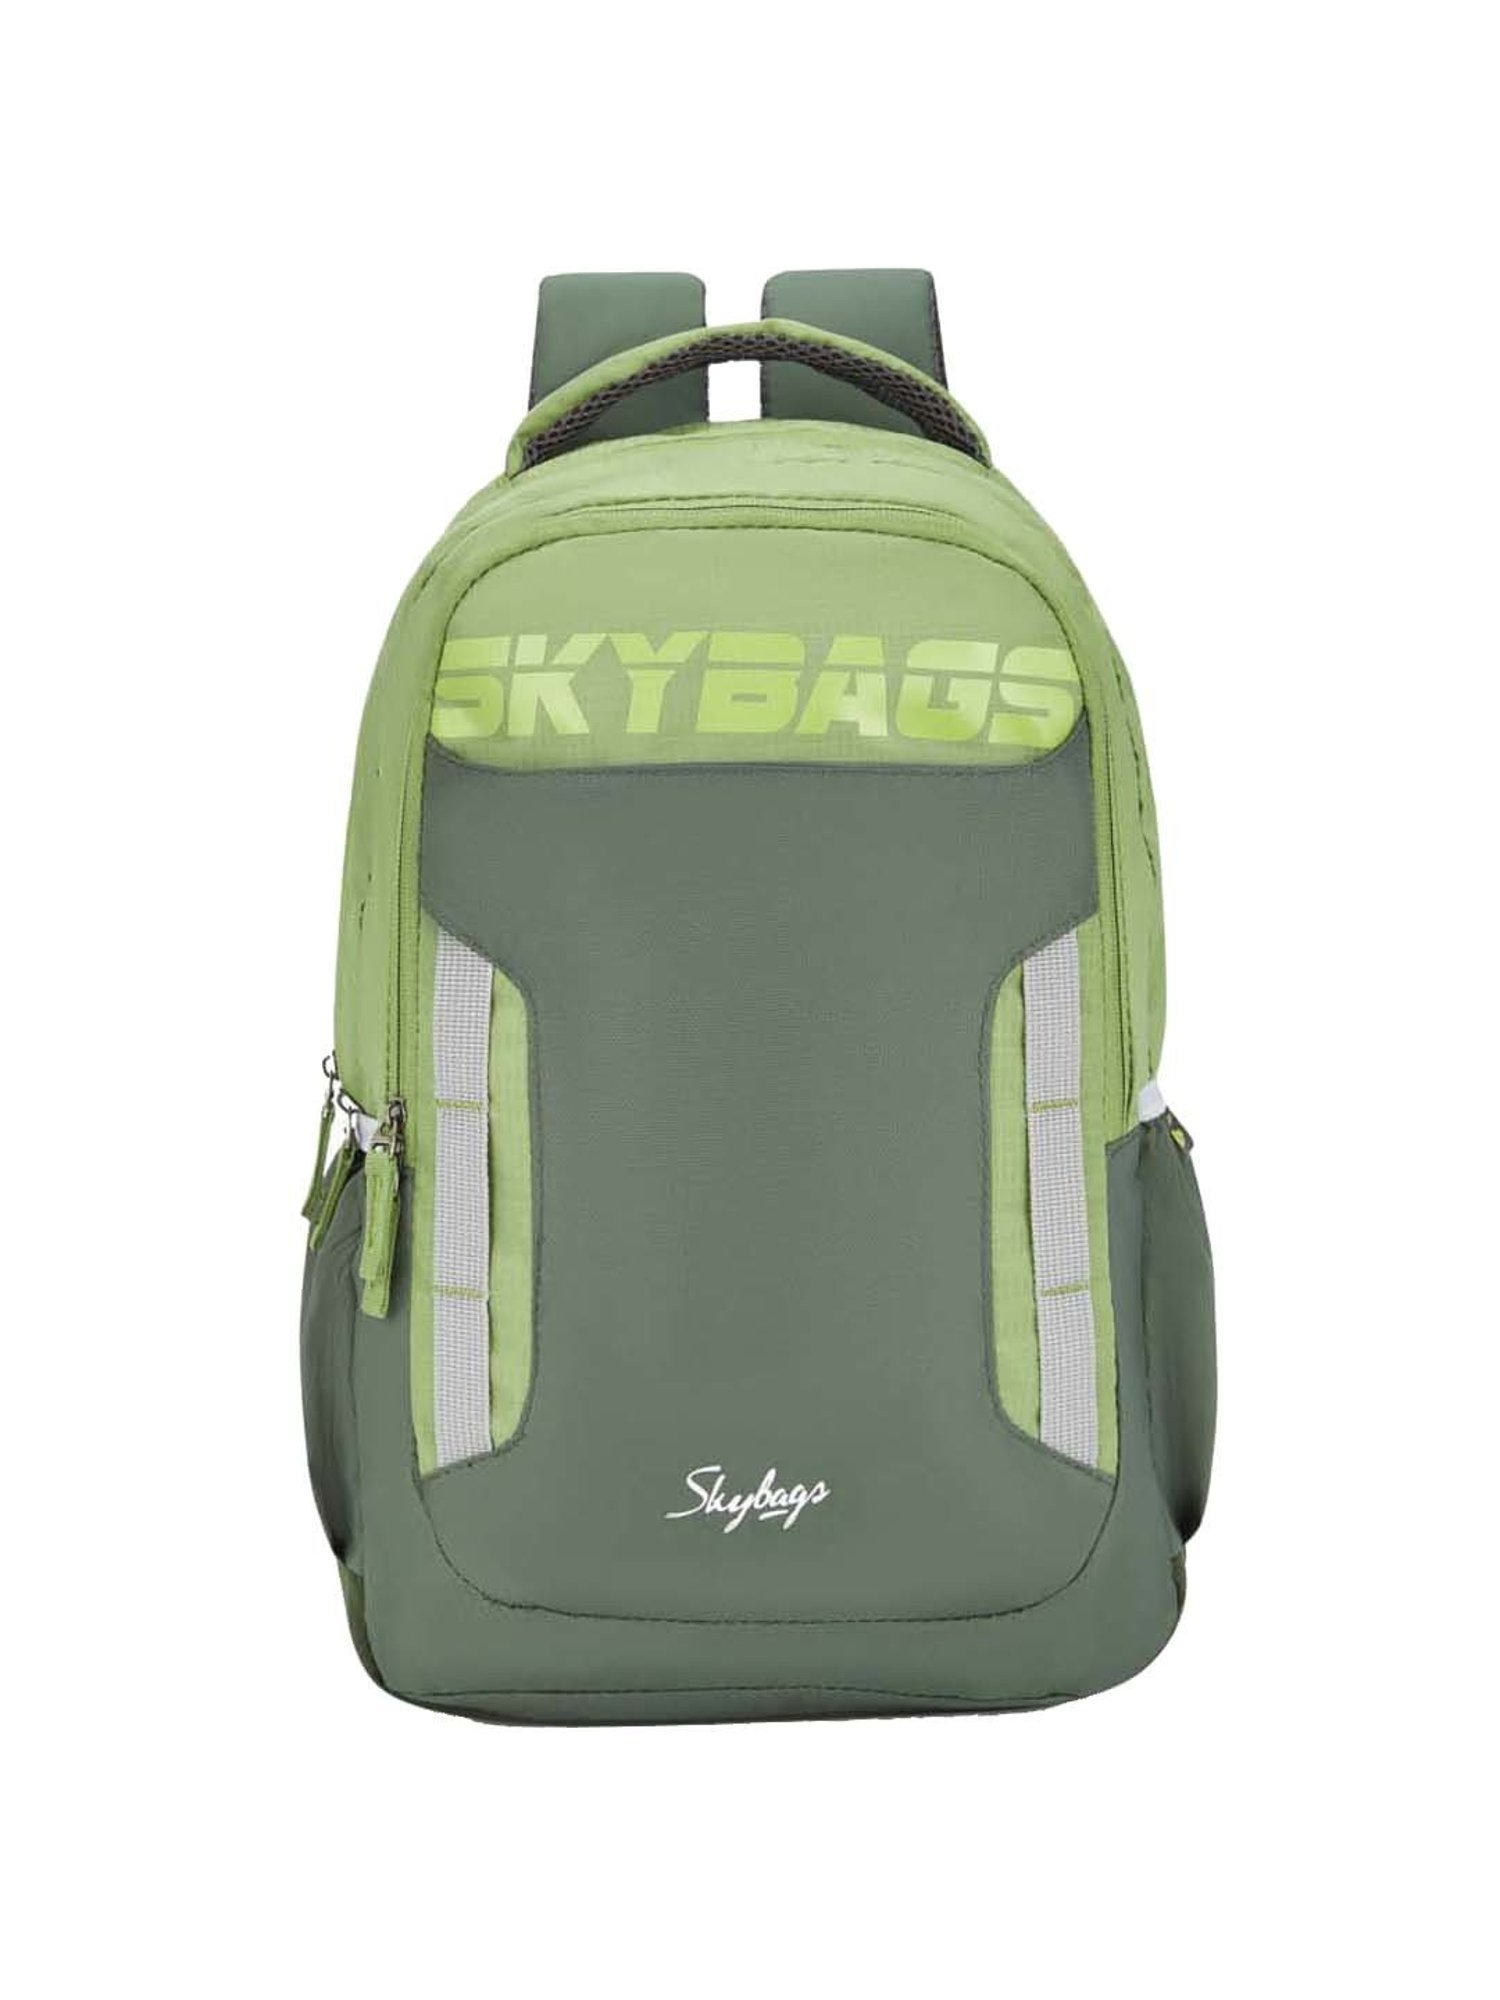 Buy Skybags Marvel 30 Ltrs Black Medium Backpack Online At Best Price @  Tata CLiQ